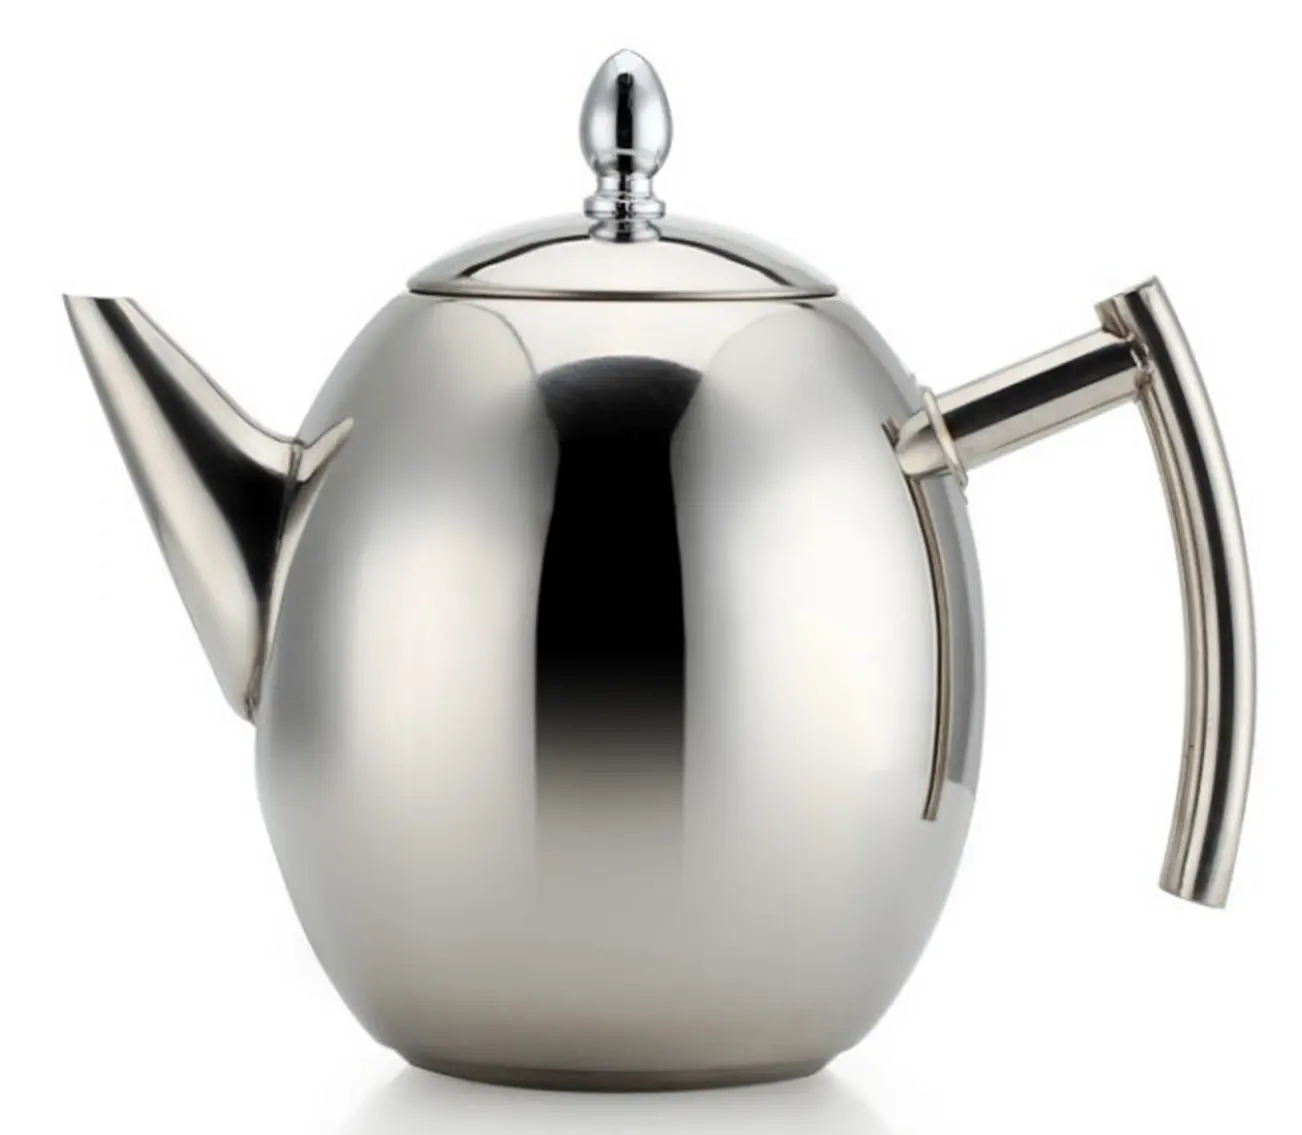 Hot sale stainless steel silver water kettle with filter/ portable tea pot/water jug with infuser cute tea kettle 1/1.5 L